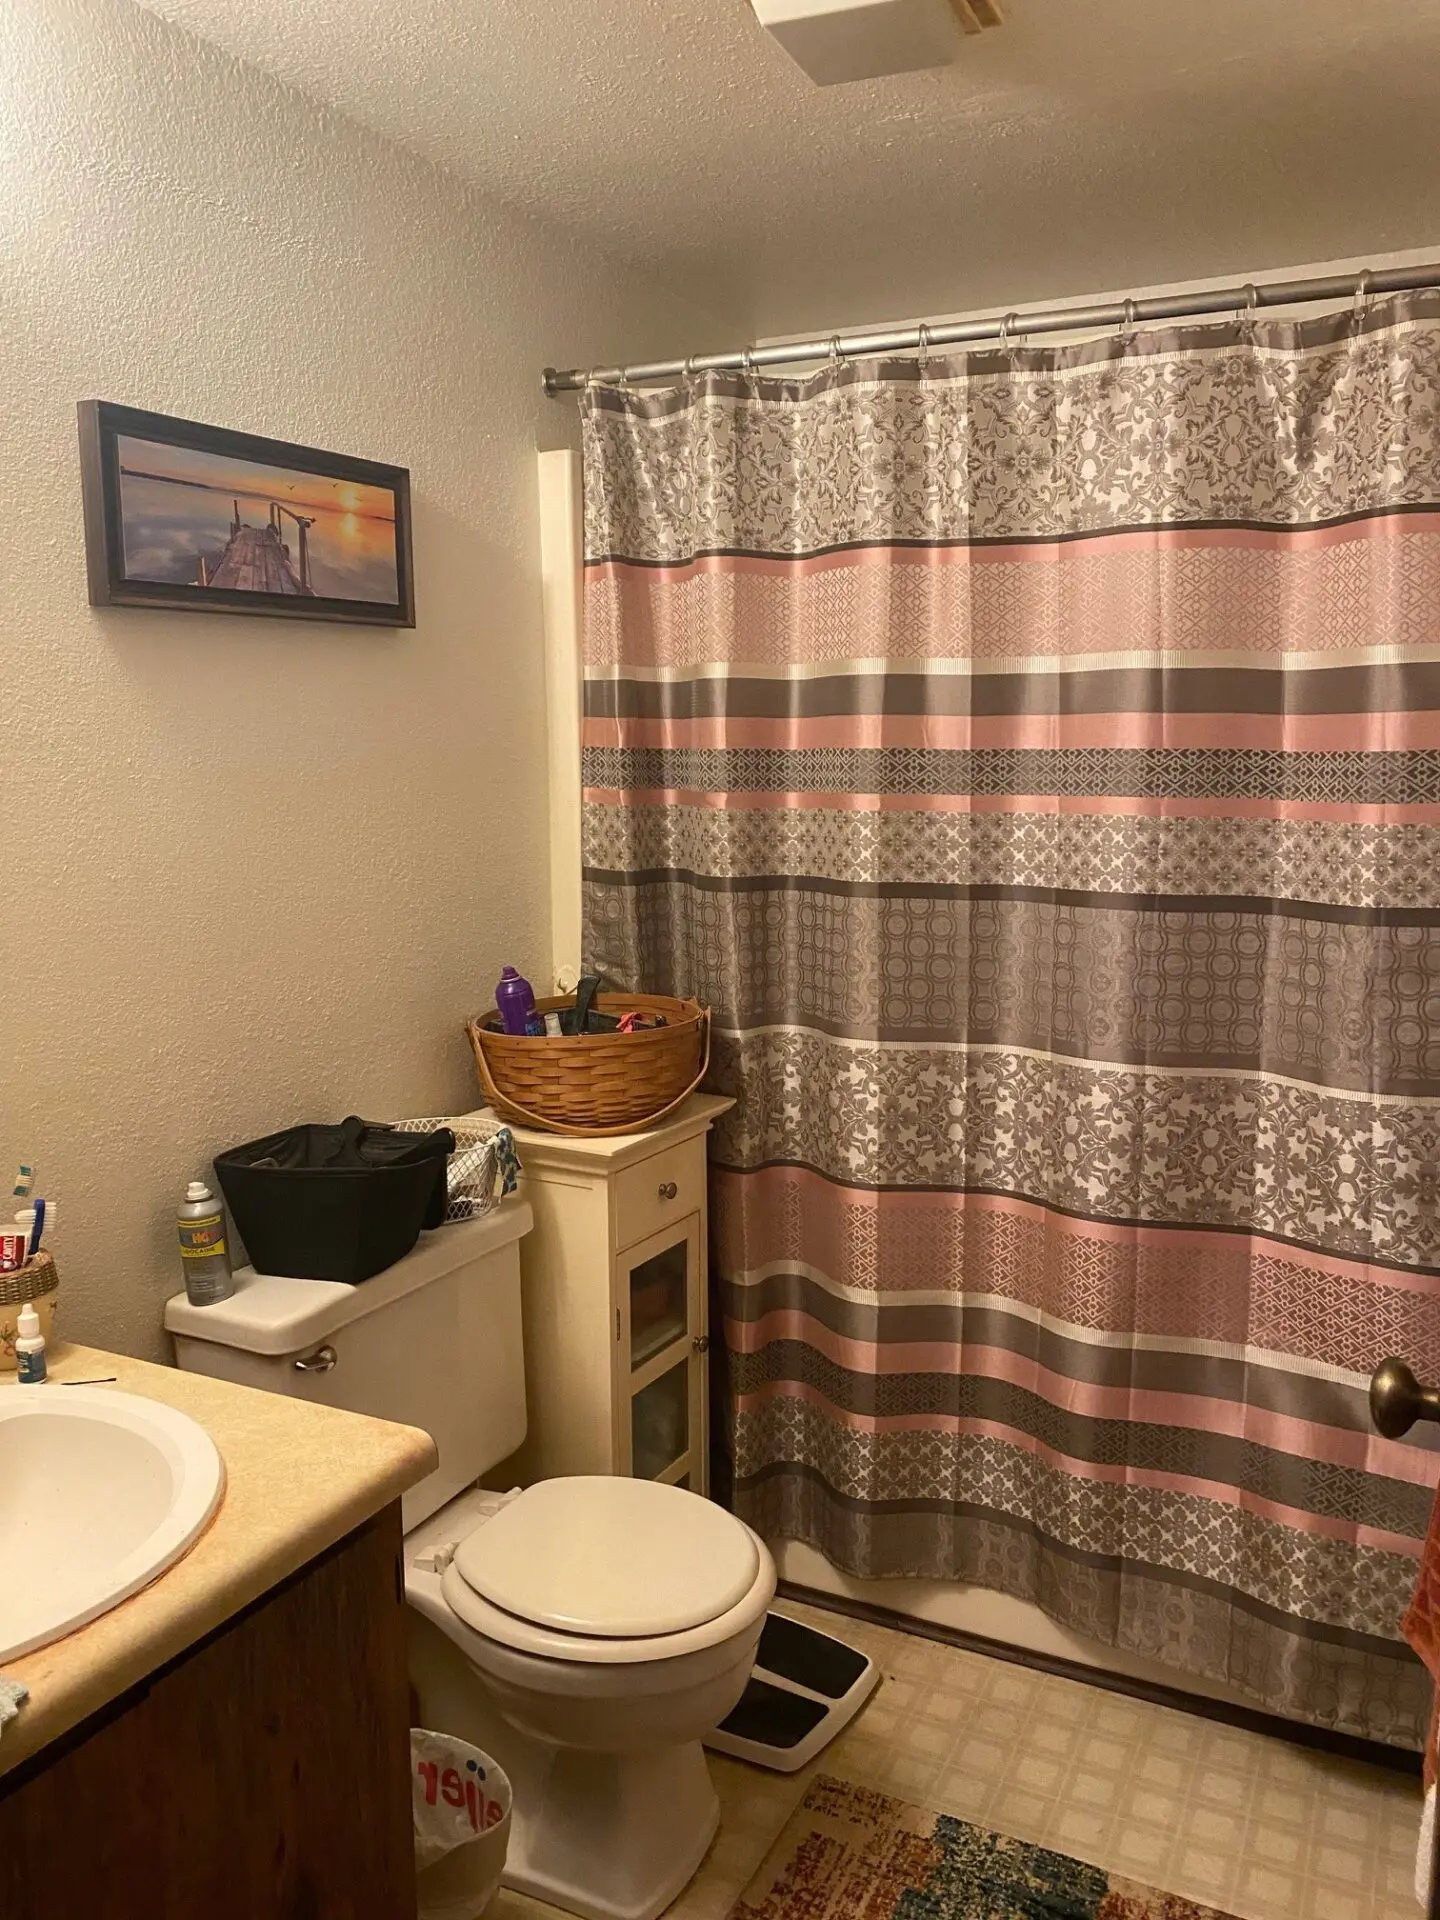 Ridgeview apartments bathroom with curtains